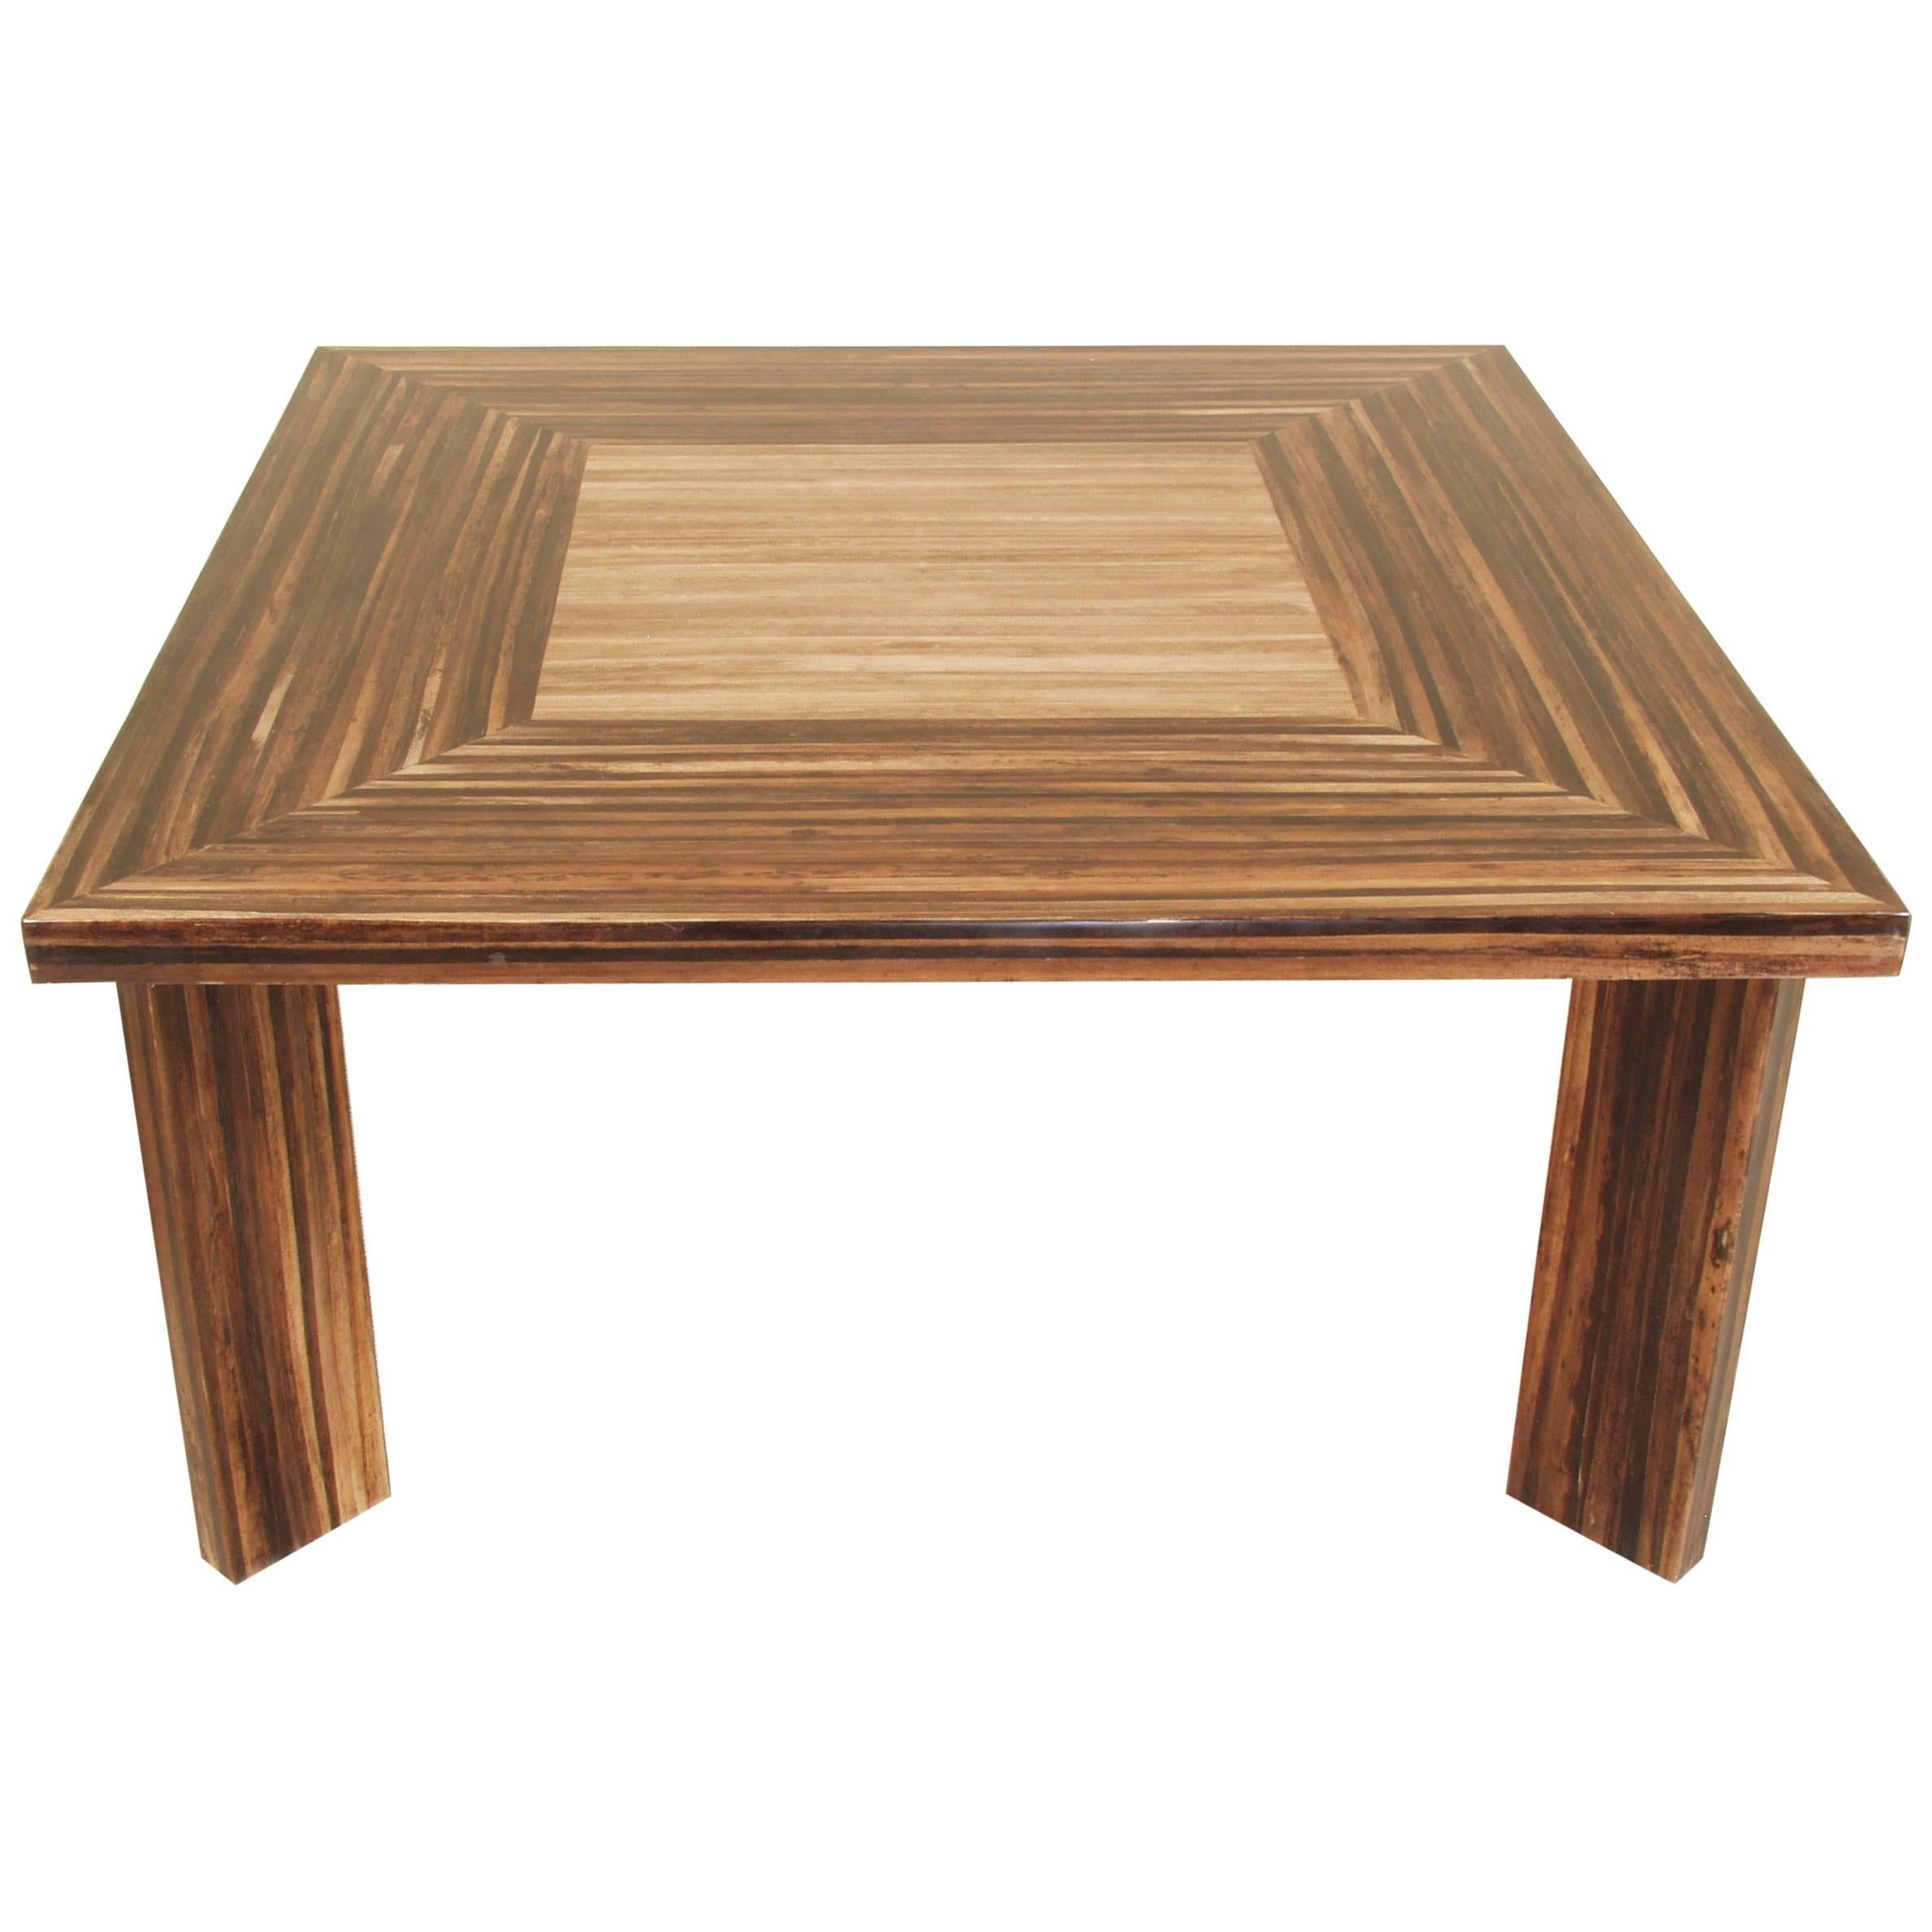 "Barbados" Square Dining Table in Dark Banana Bark with Honeycomb Finish For Sale